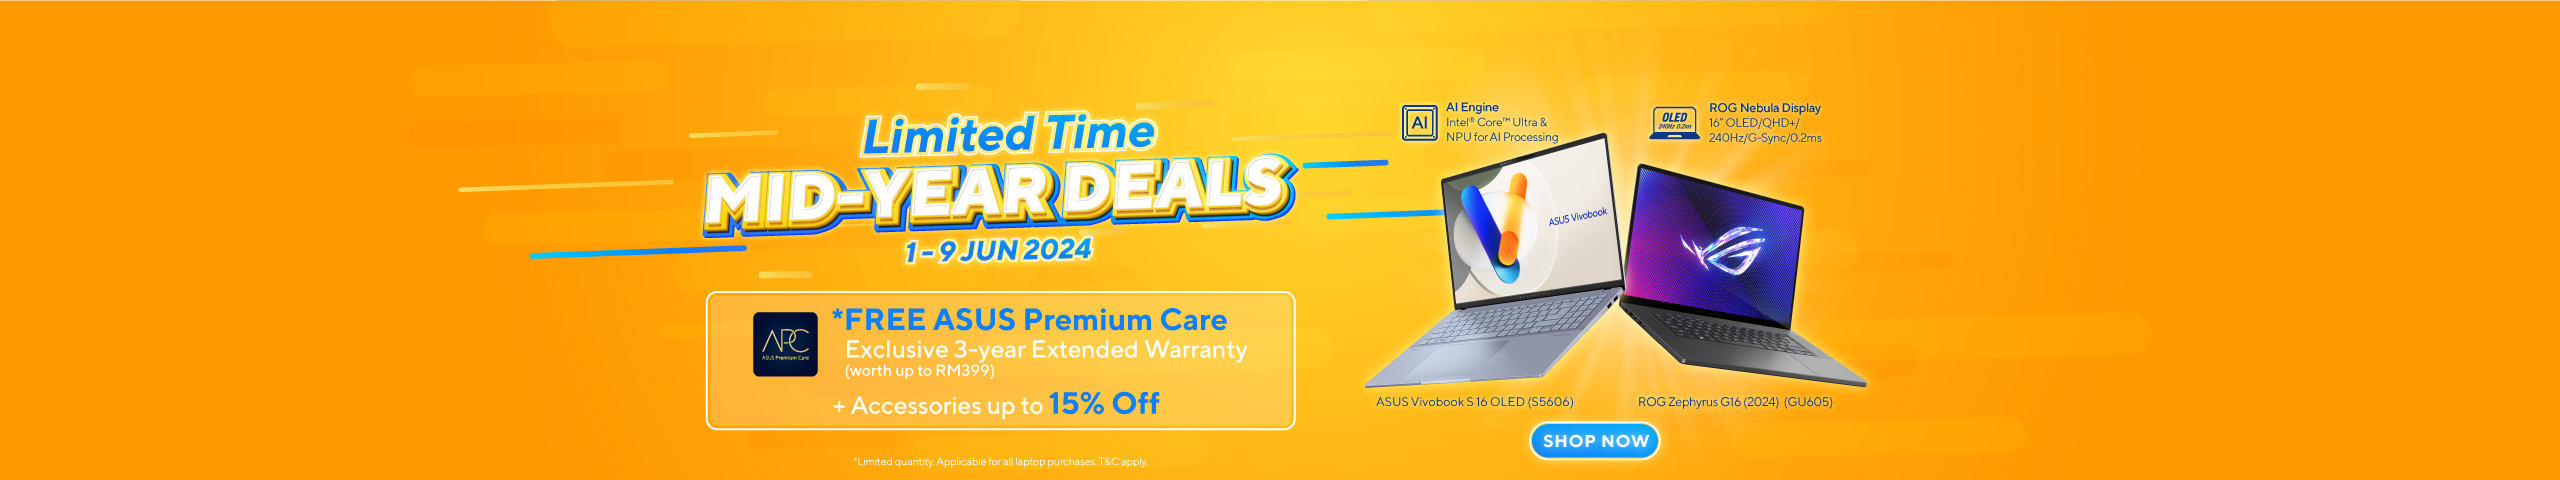 mid-year sale promotion 2024, free asus premium care 3-year extended warranty with selected laptop models purchase, up to 15% off for accessories